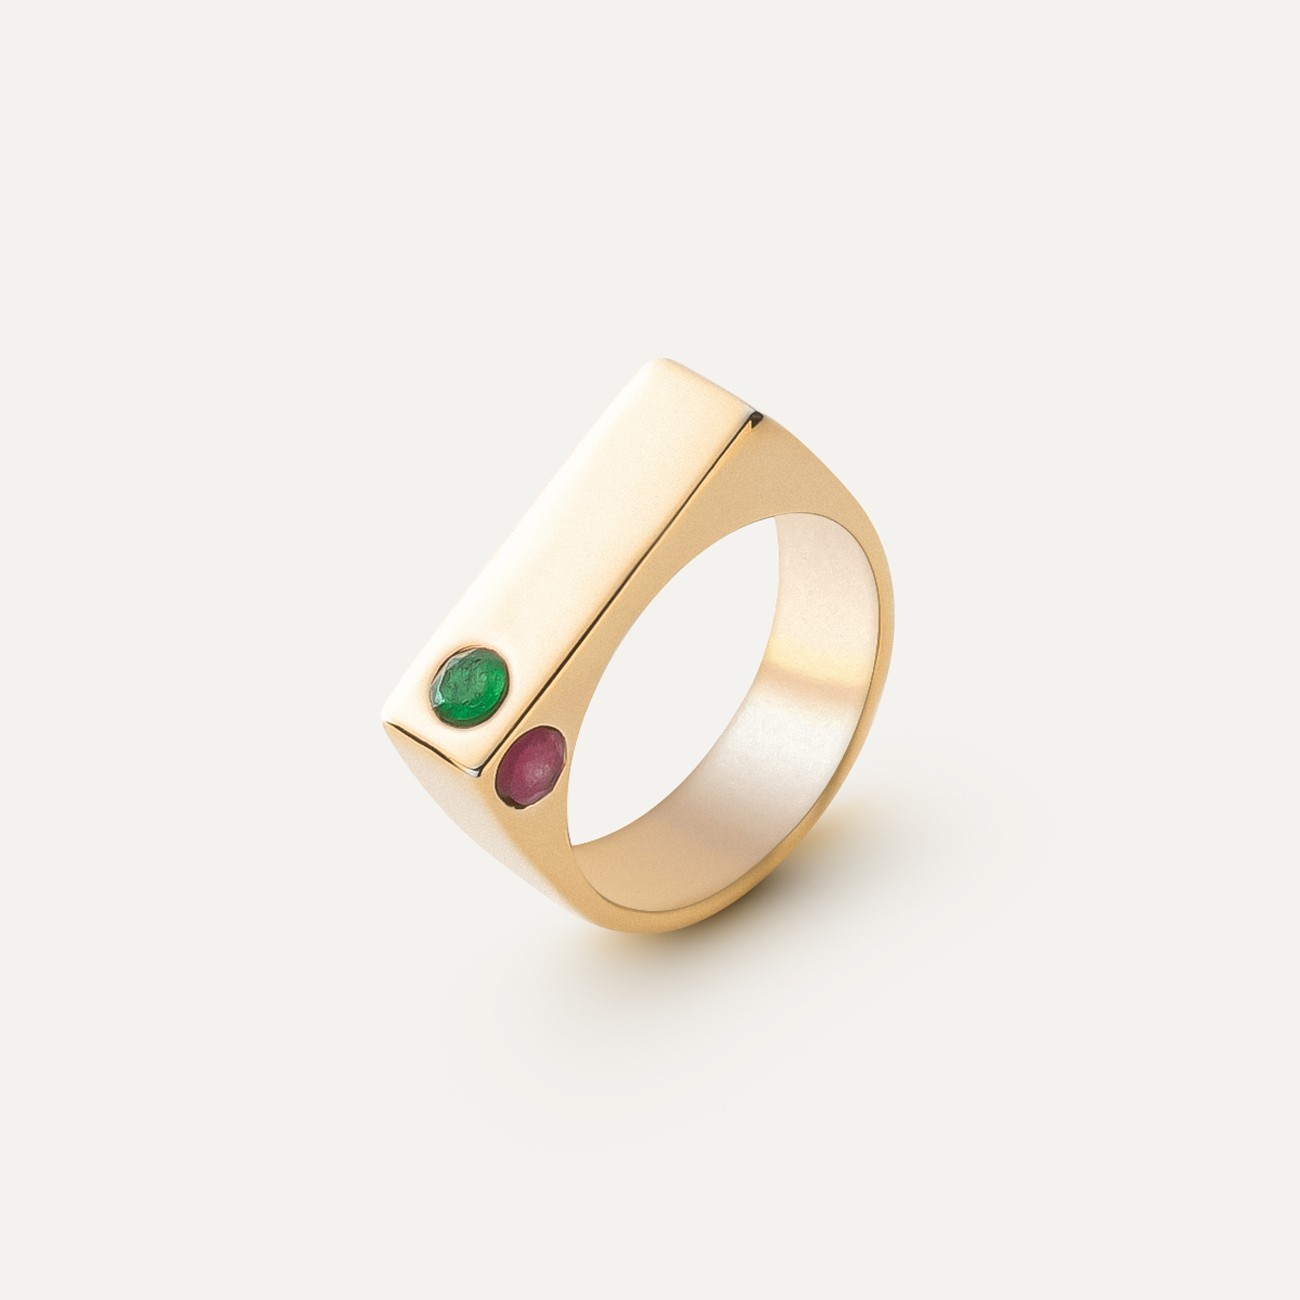 Rectangle ring with a colorful stones